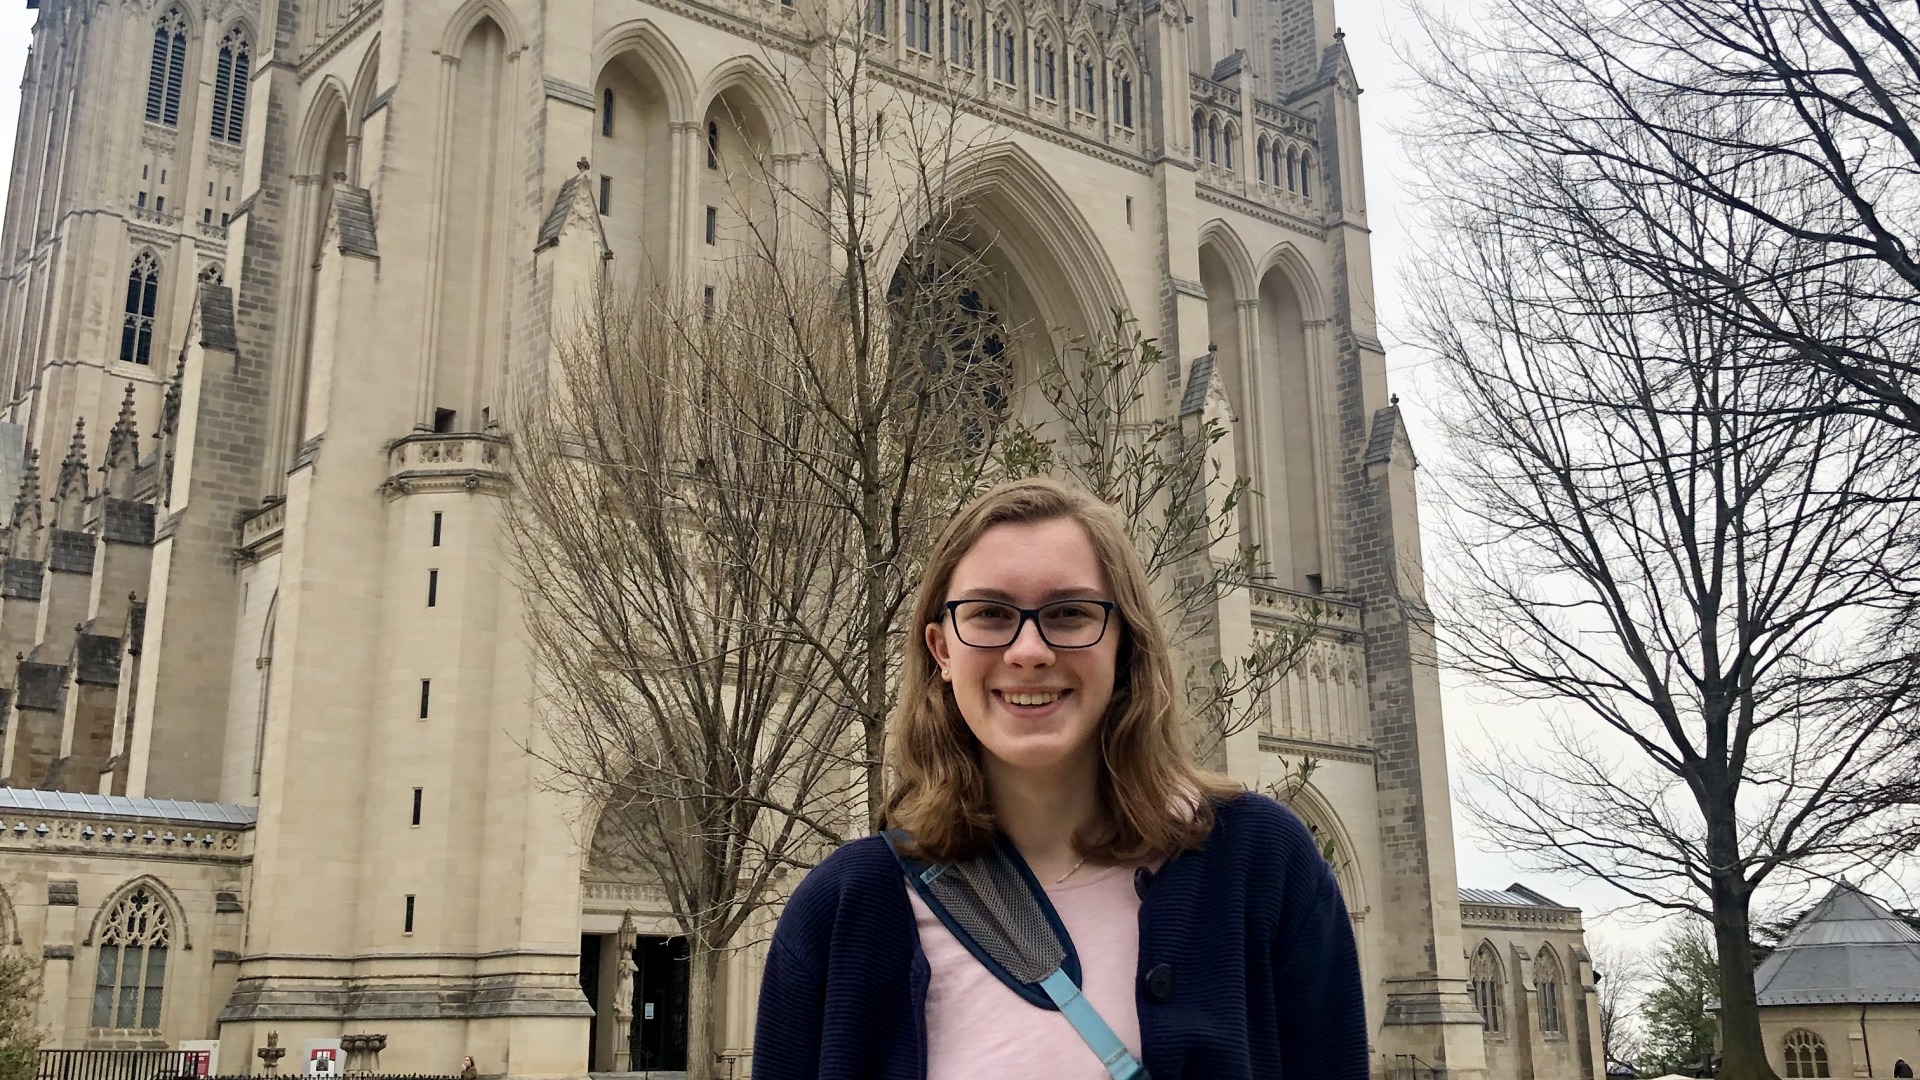 Ailsa in front of the Washington National Cathedral